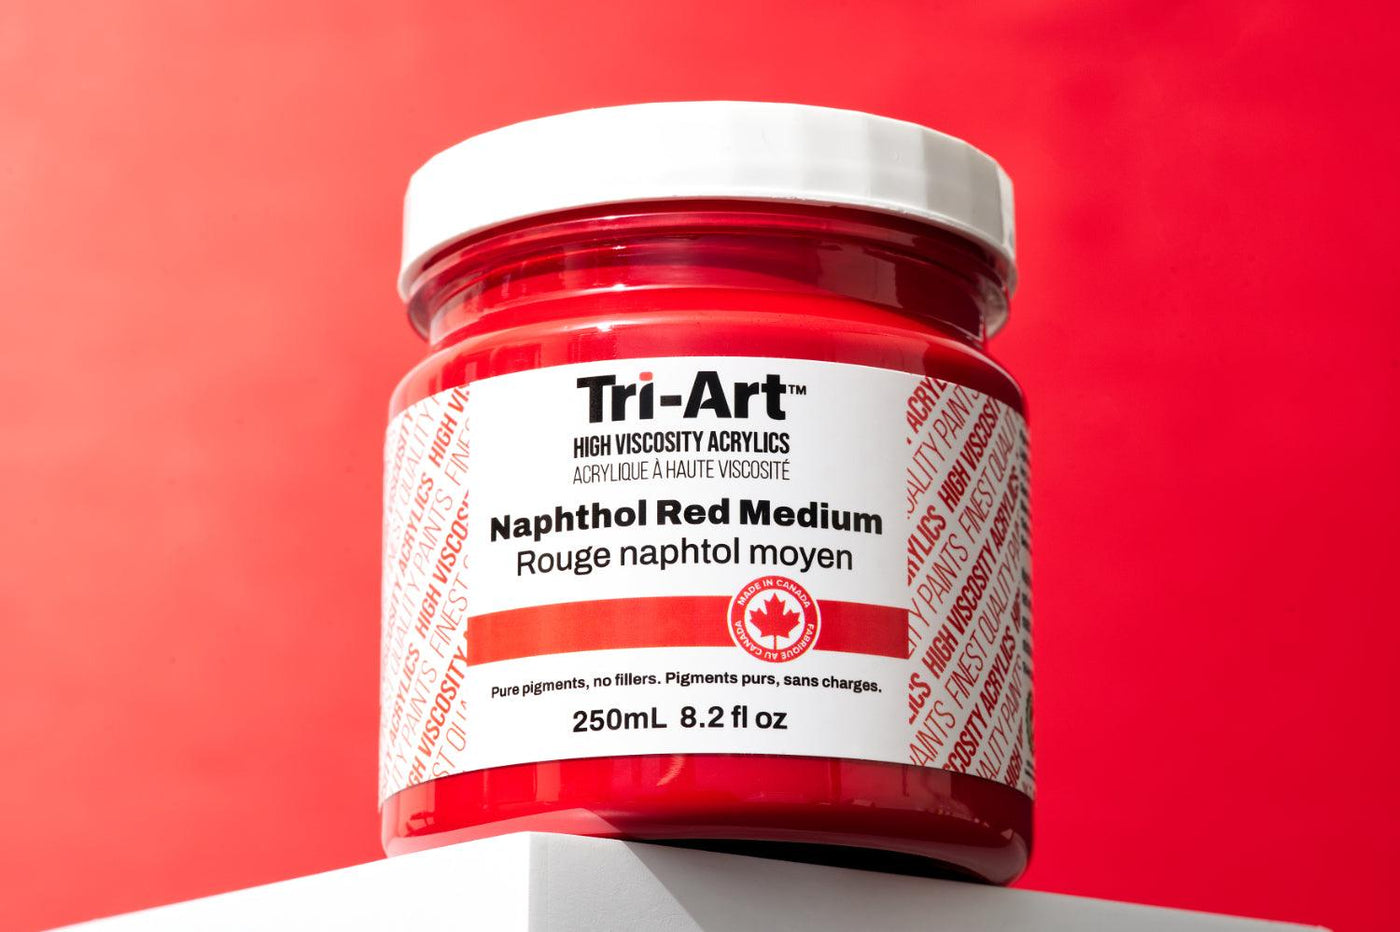 This is an image of a jar of Naphthol Red Medium from the Tri-Art High Viscosity acrylic paint line.